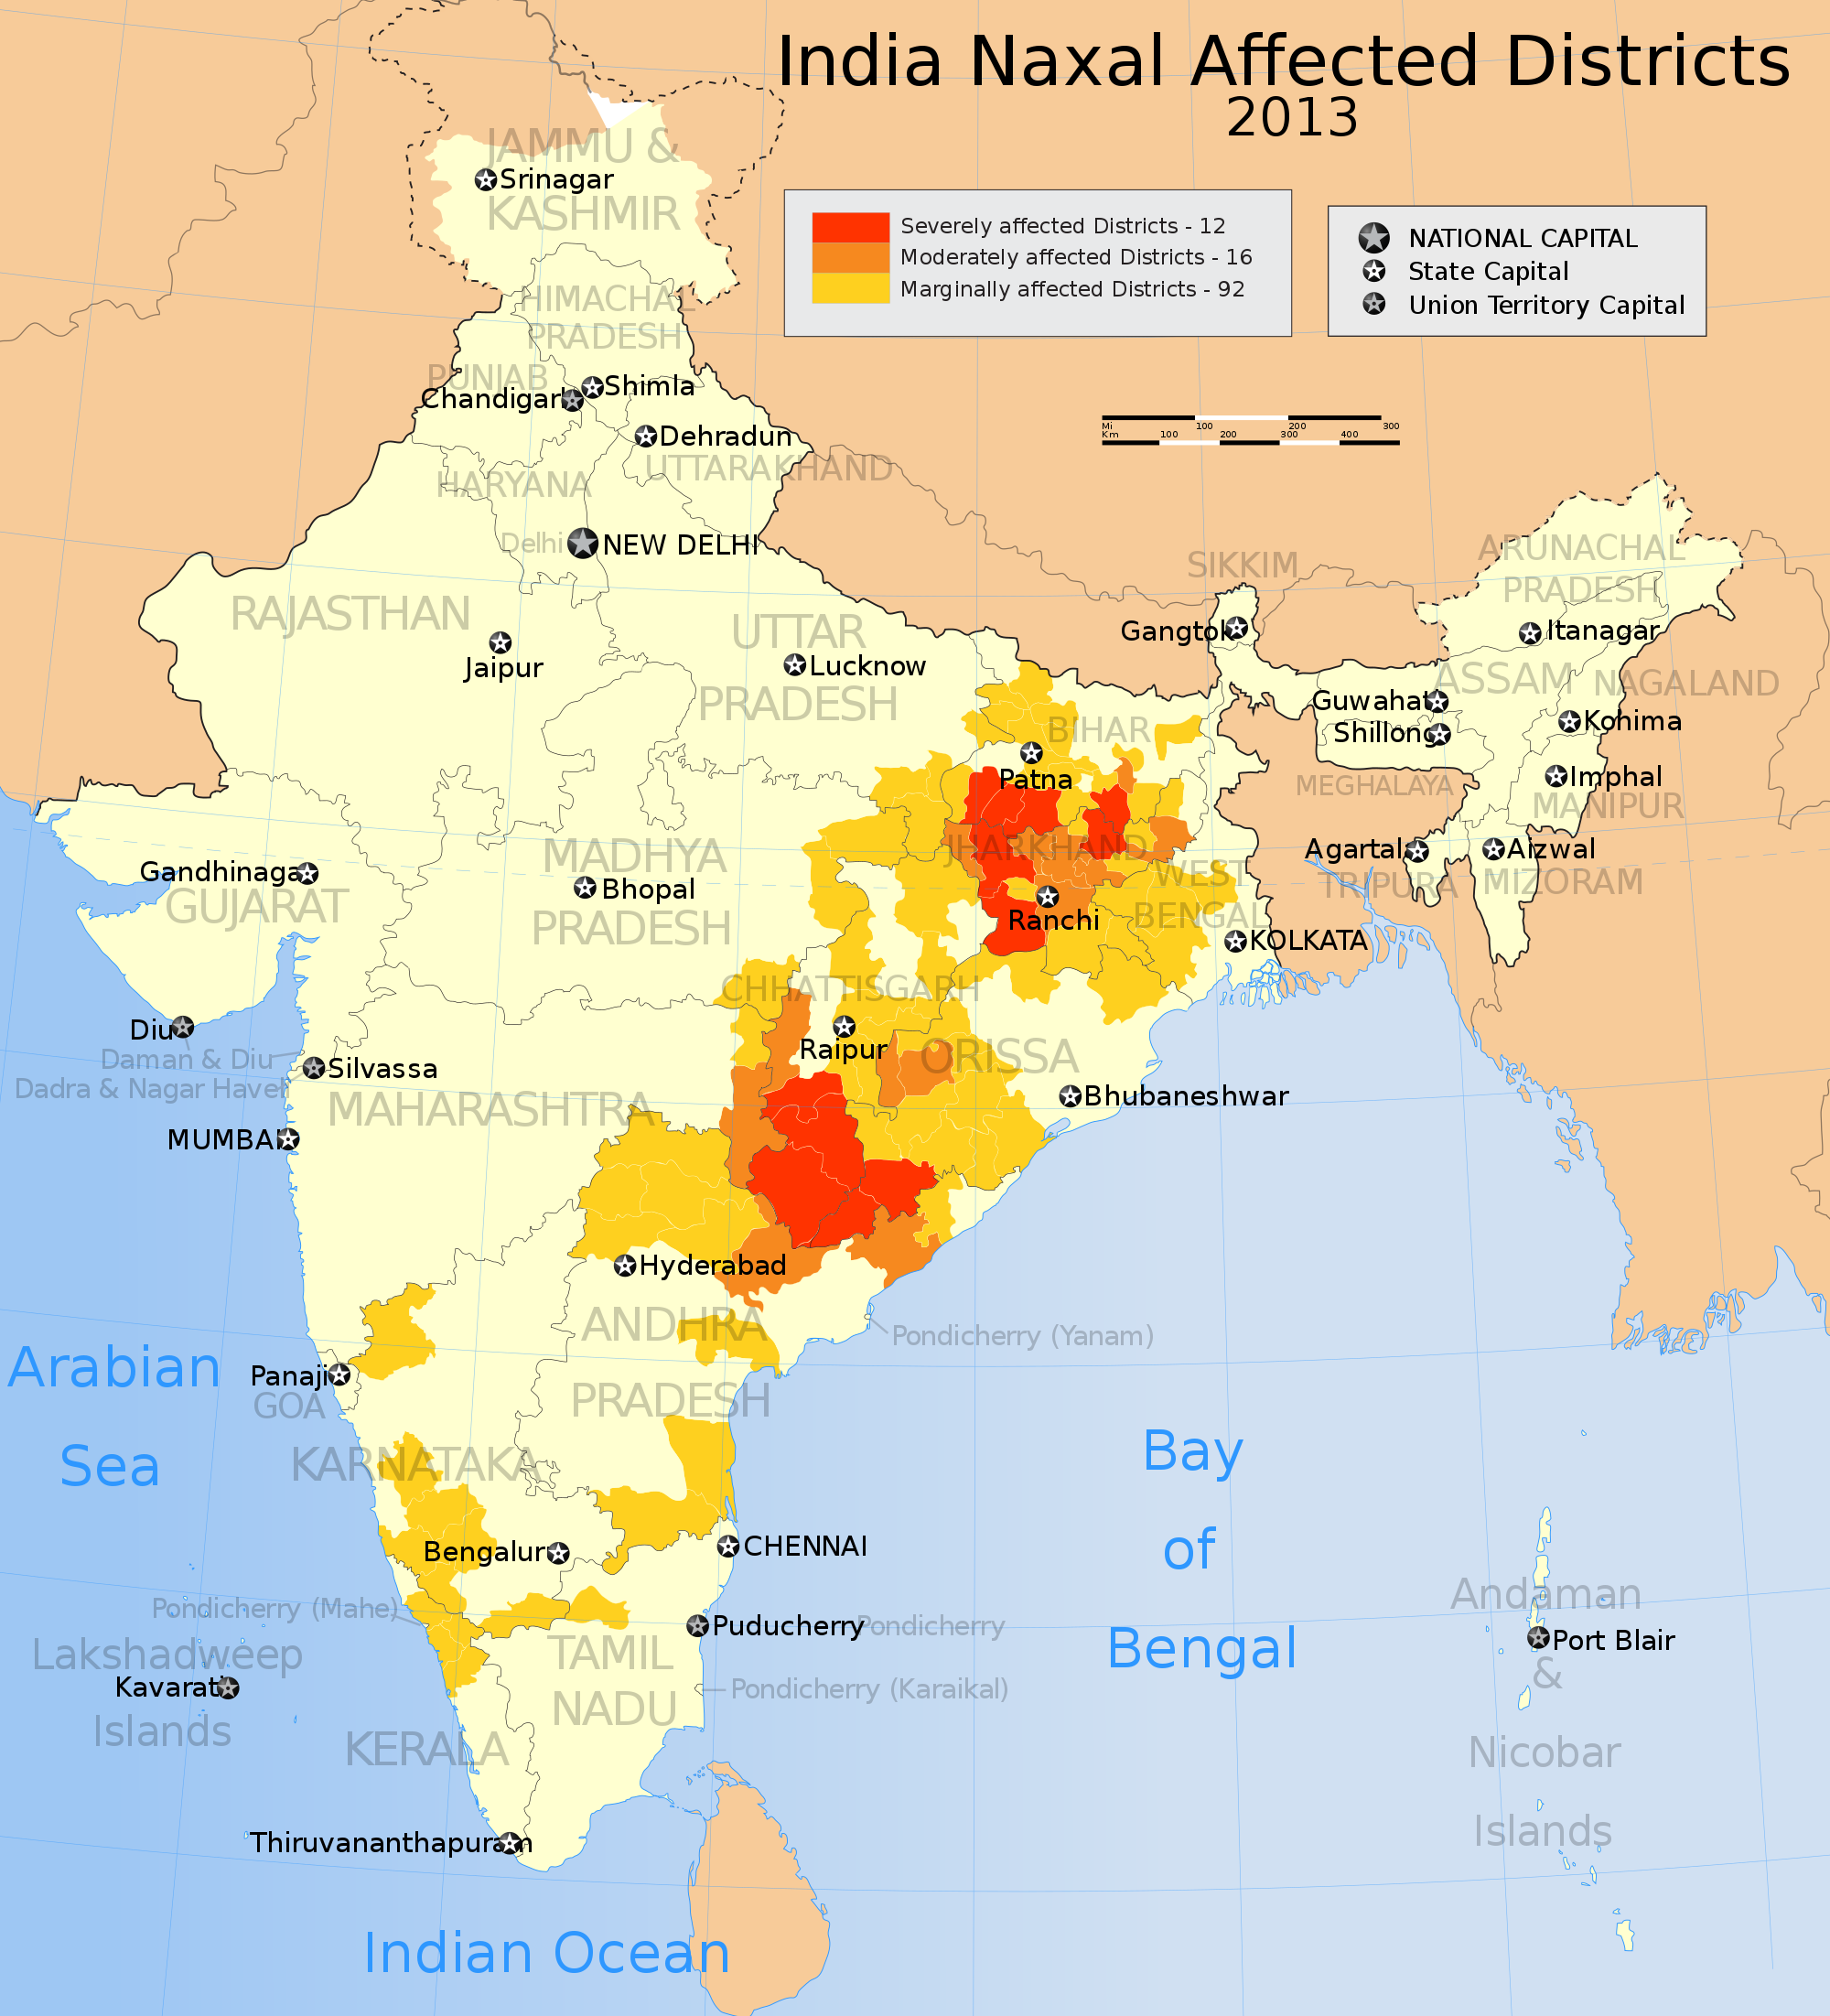 2000px-India_map_Naxal_Left-wing_violence_or_activity_affected_districts_2013.SVG.png